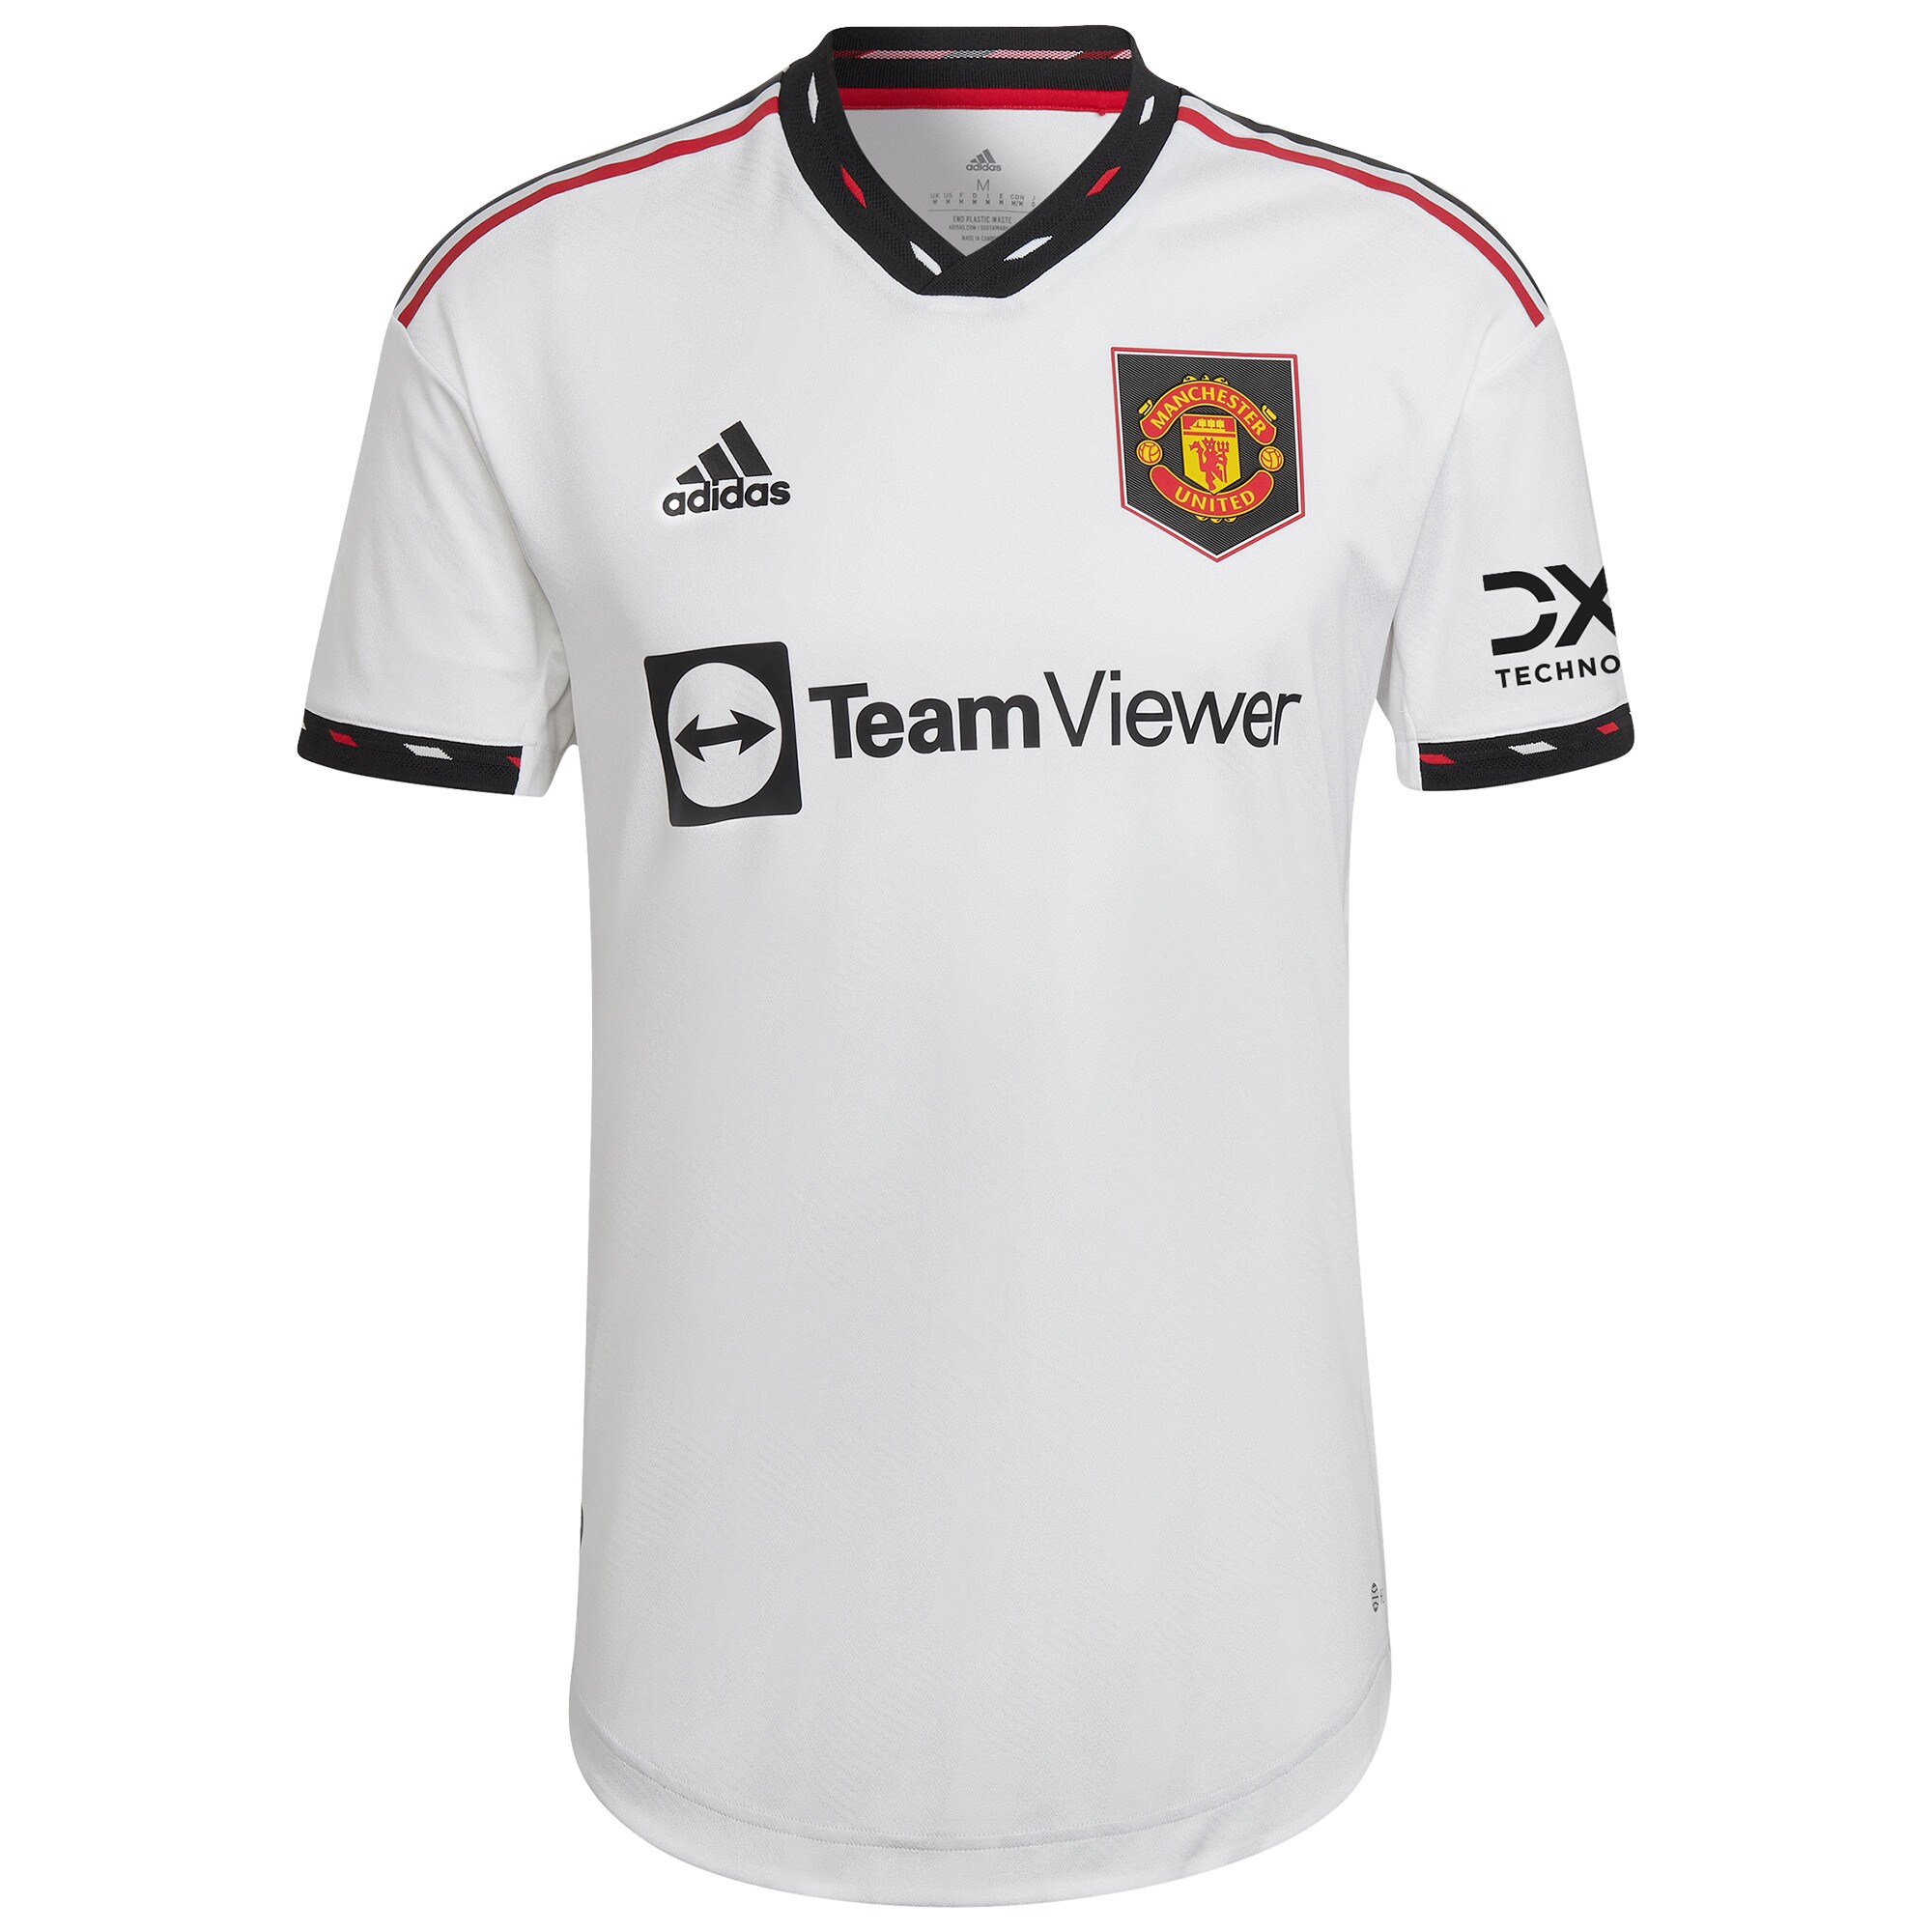 Manchester United Away Authentic Shirt 2022-23 with Dalot 20 printing